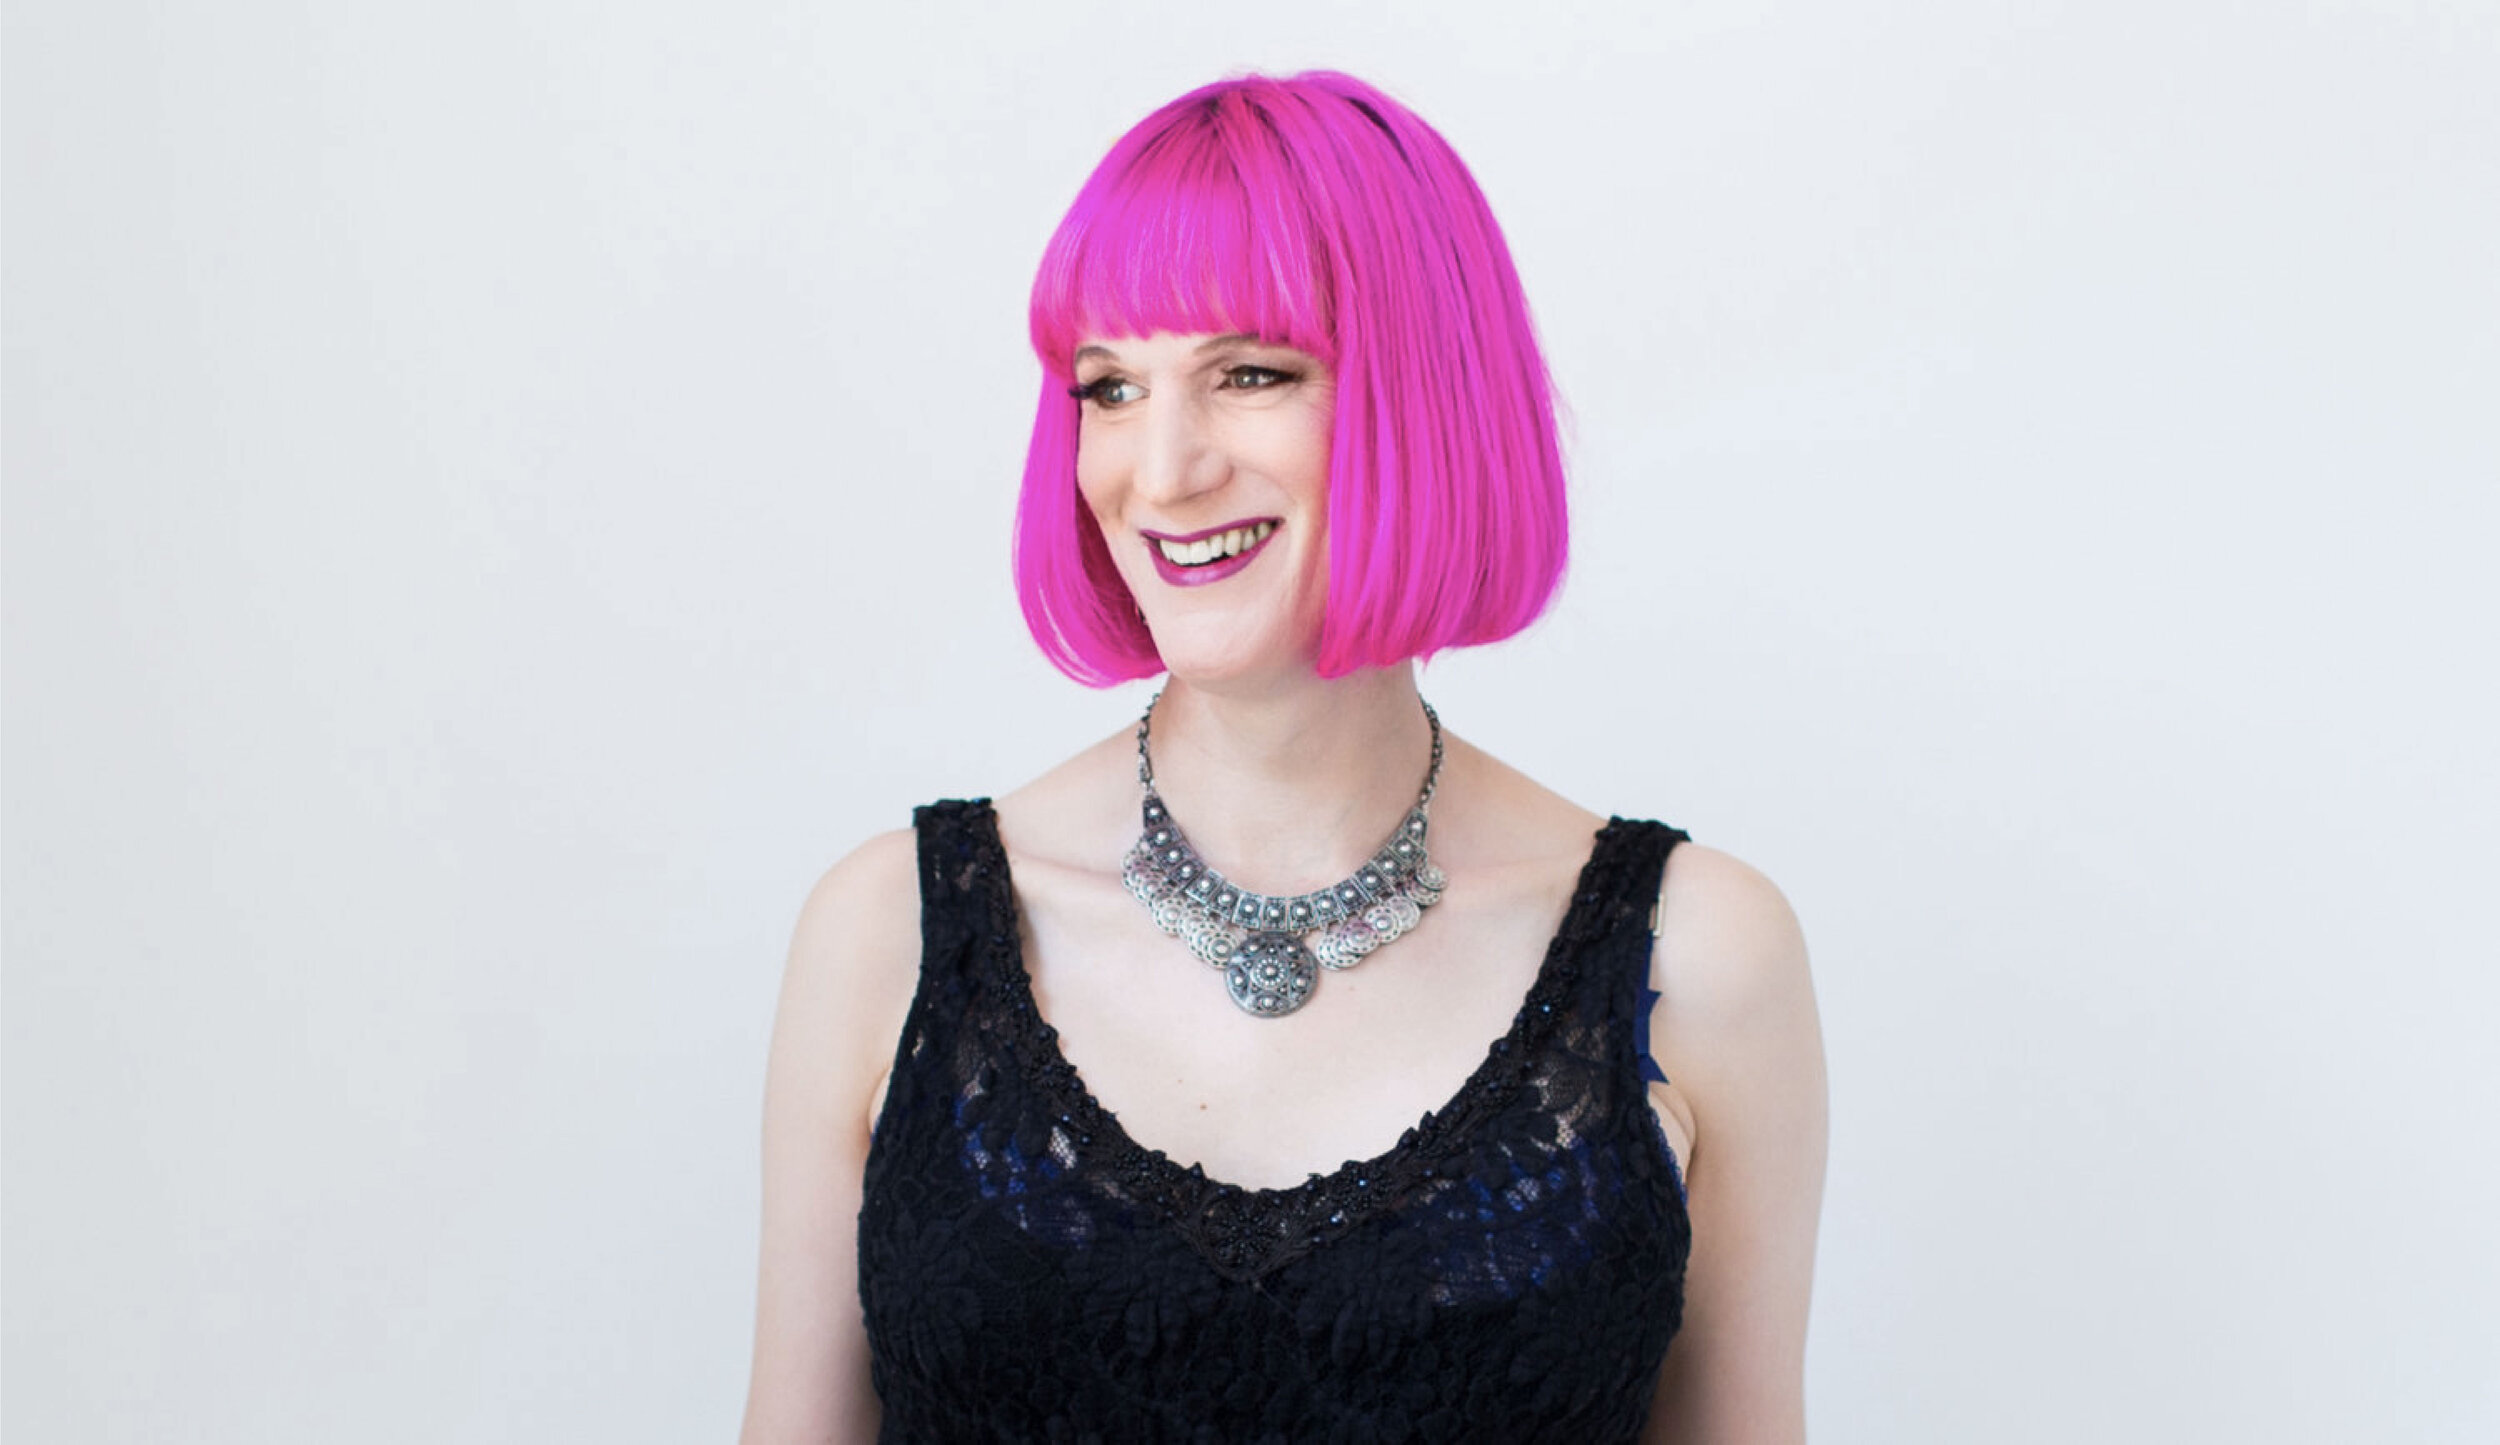 Interview with Charlie Jane Anders